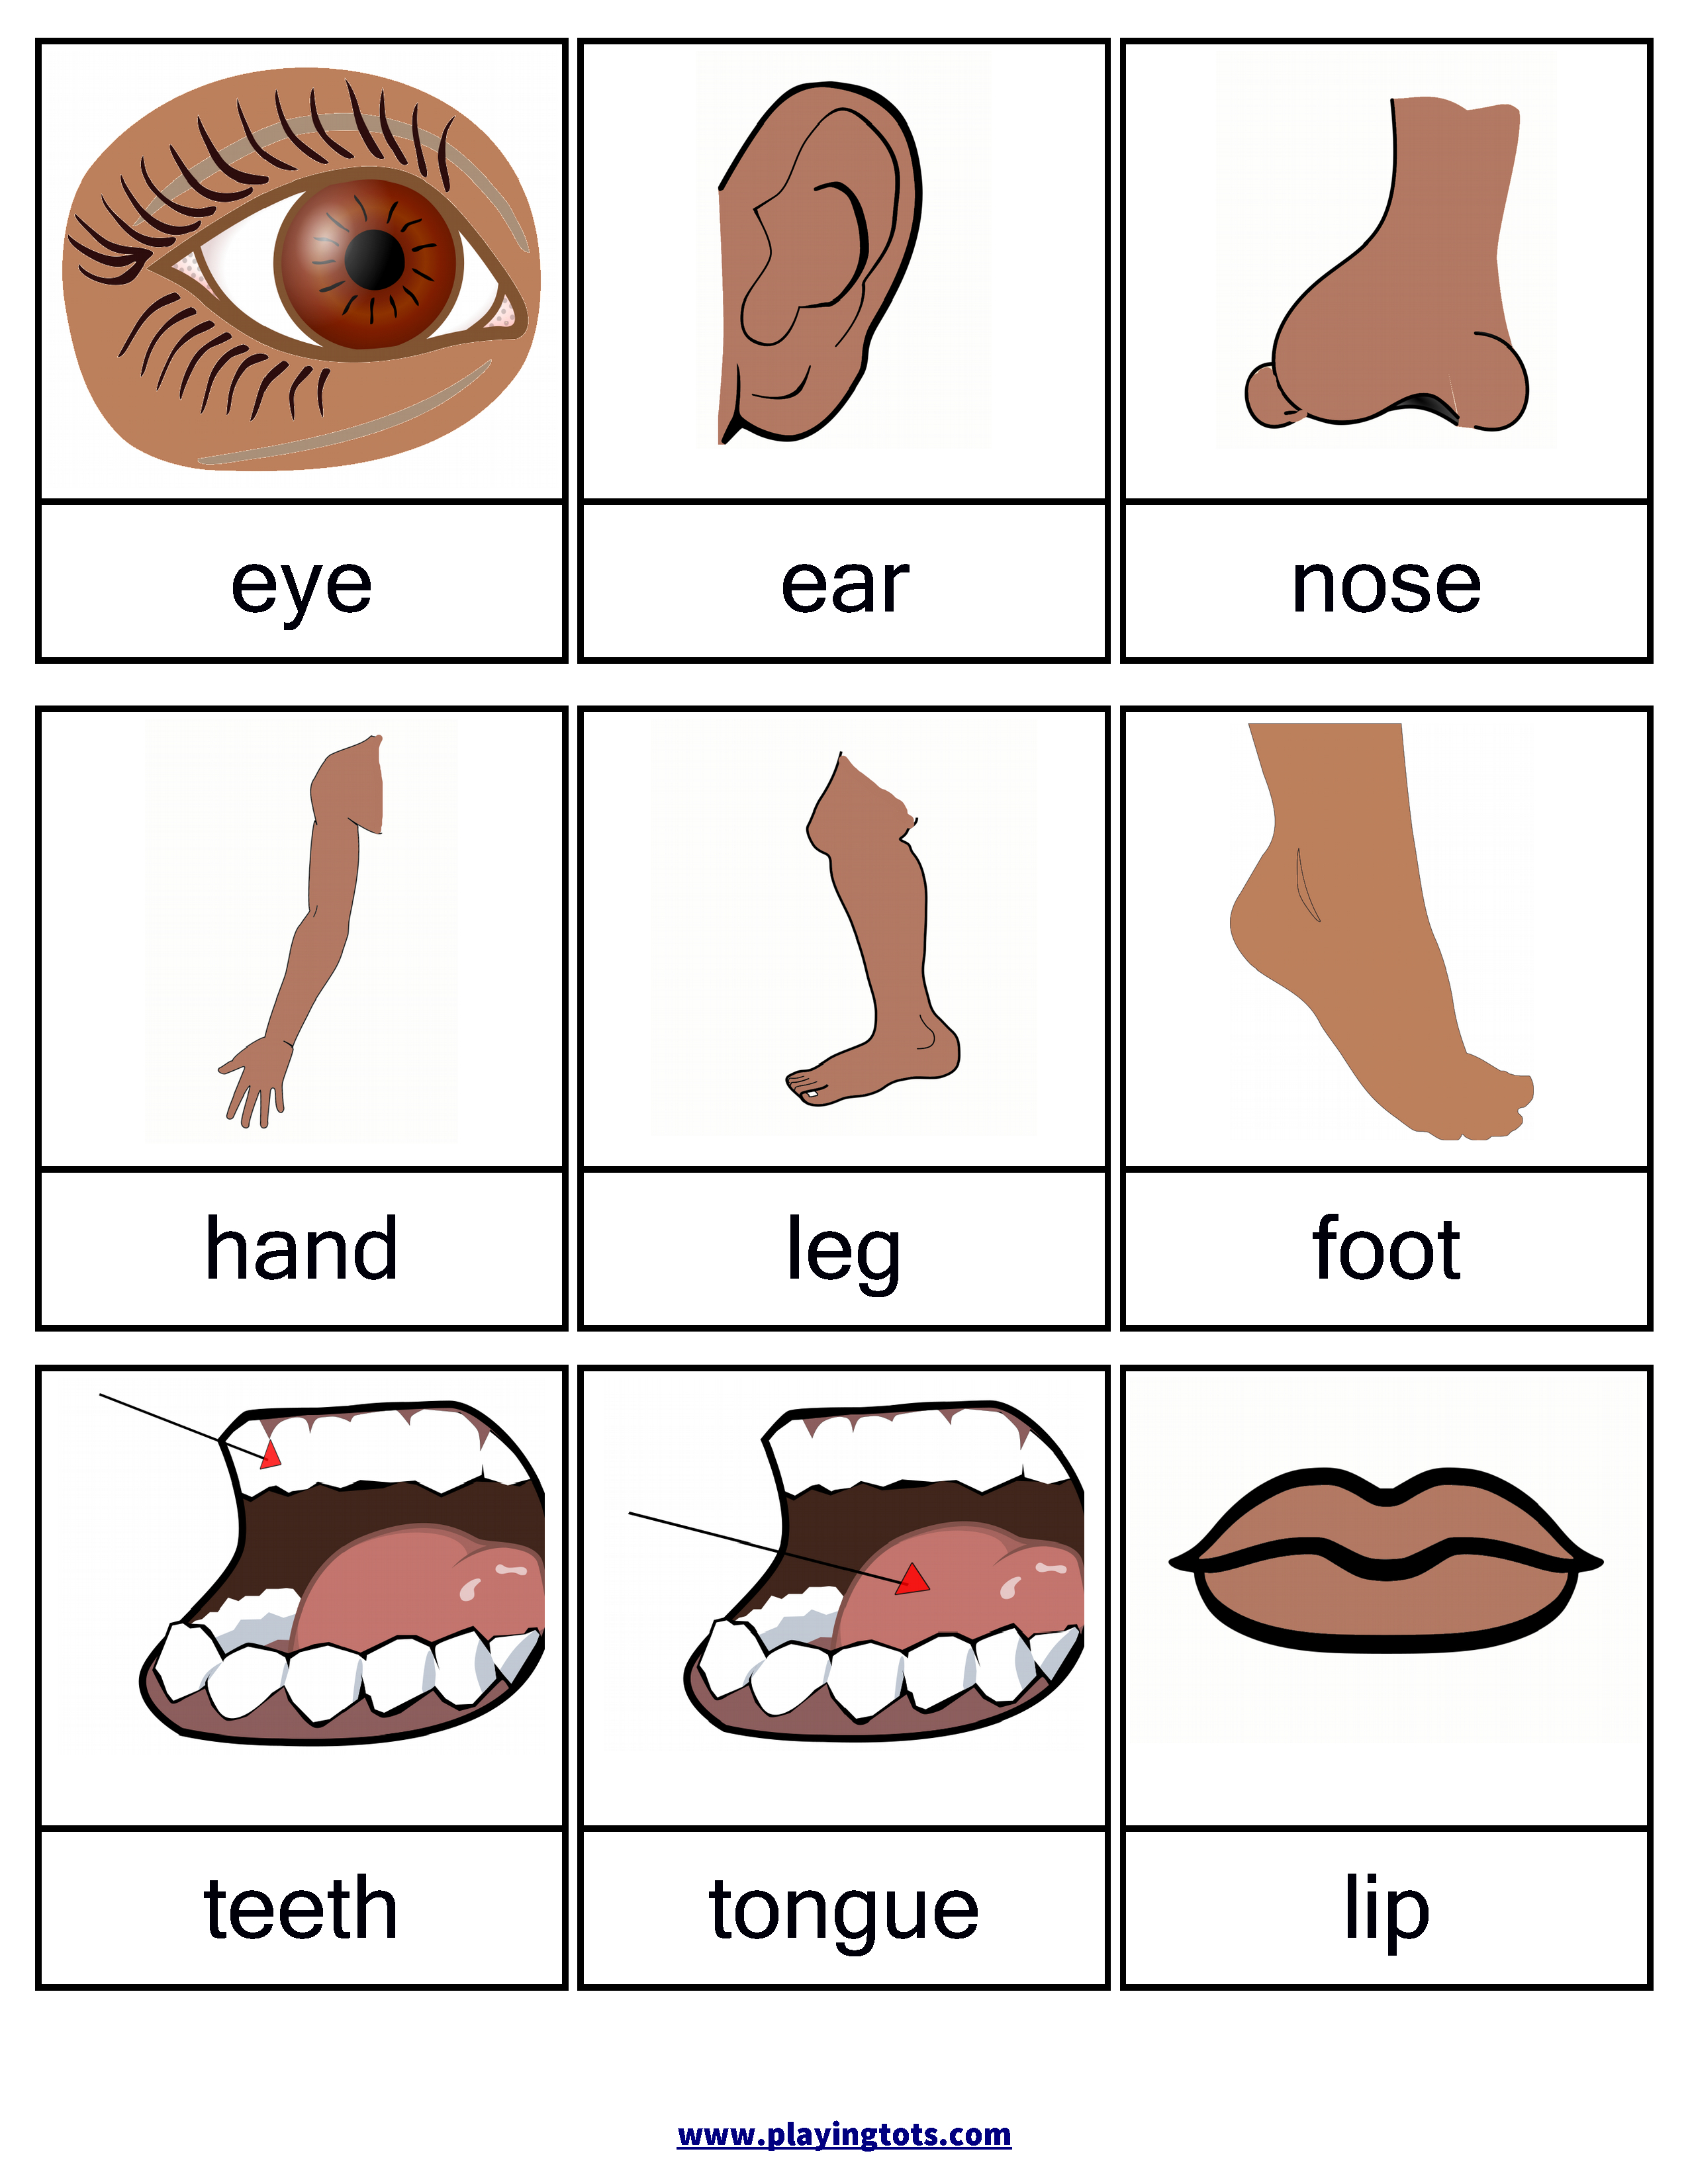 Free Printable Body Parts Flashcards | Free Printable For Learning | Free Printable Worksheets Preschool Body Parts